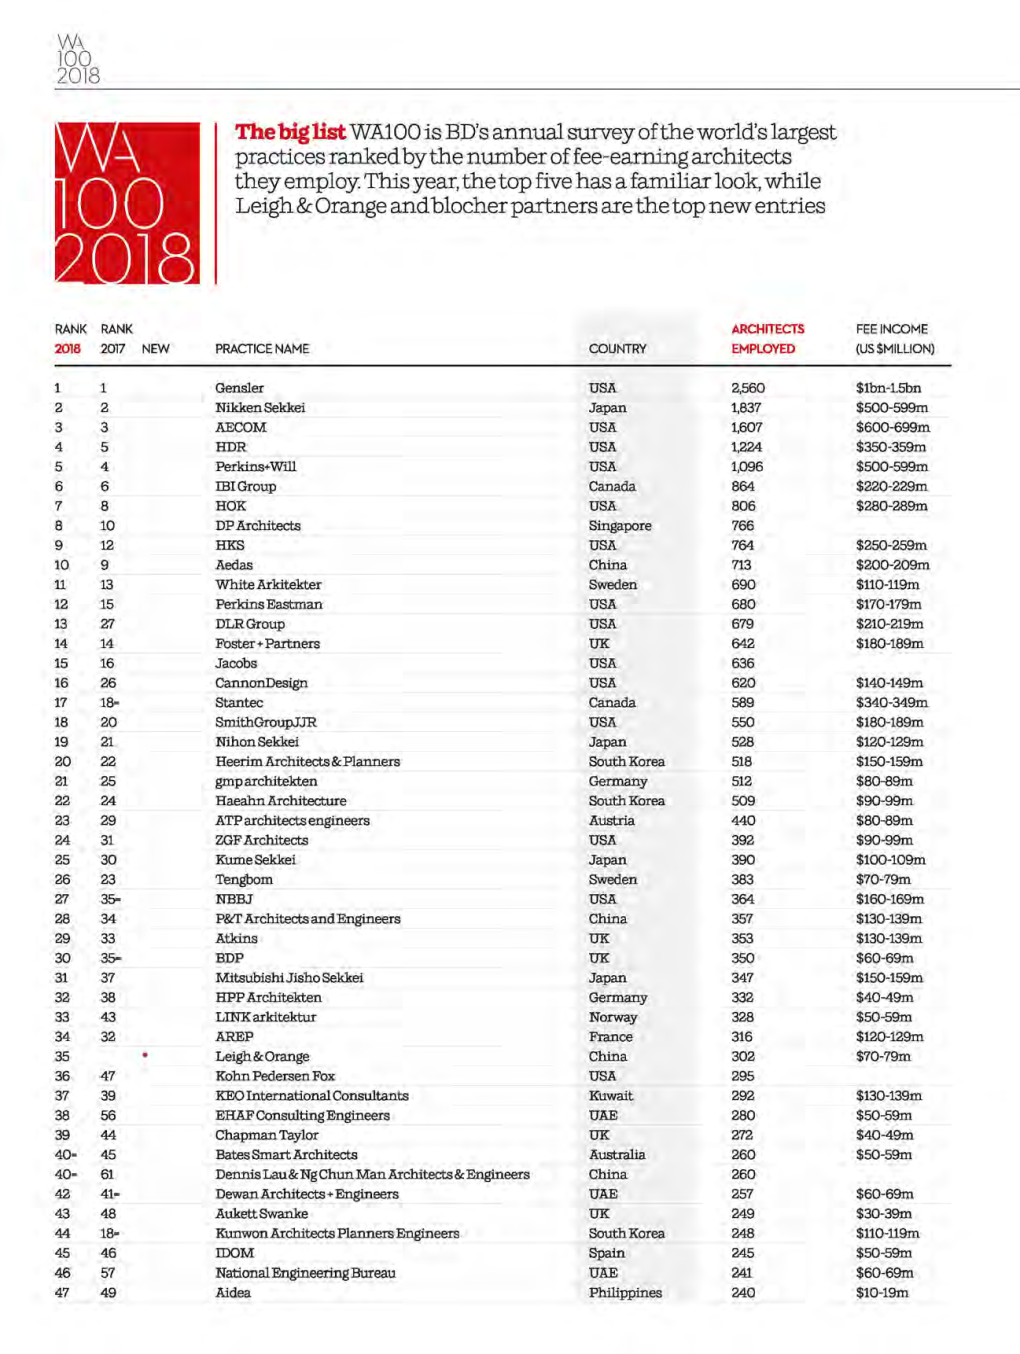 The Big List WA100 Is BD's Annual Survey of the World's Largest